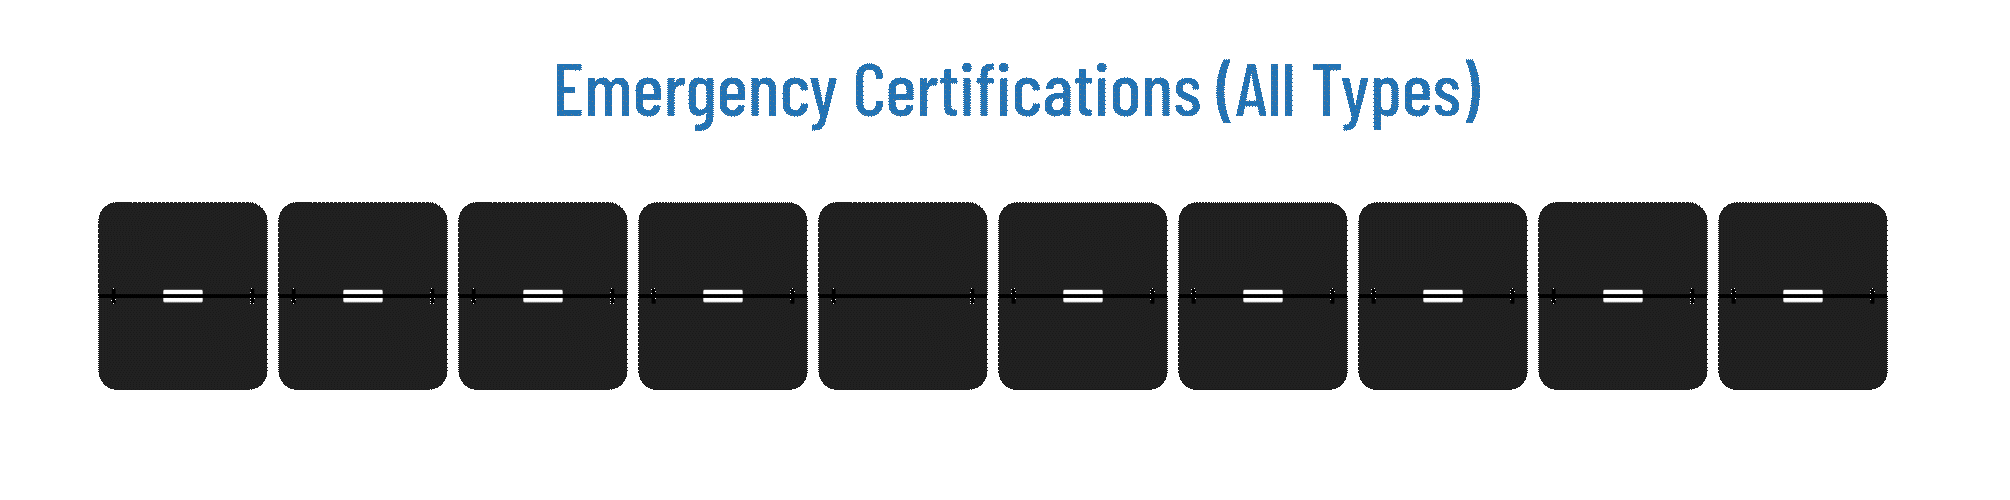 Emergency Certifications (All Types): less than 2  Weeks